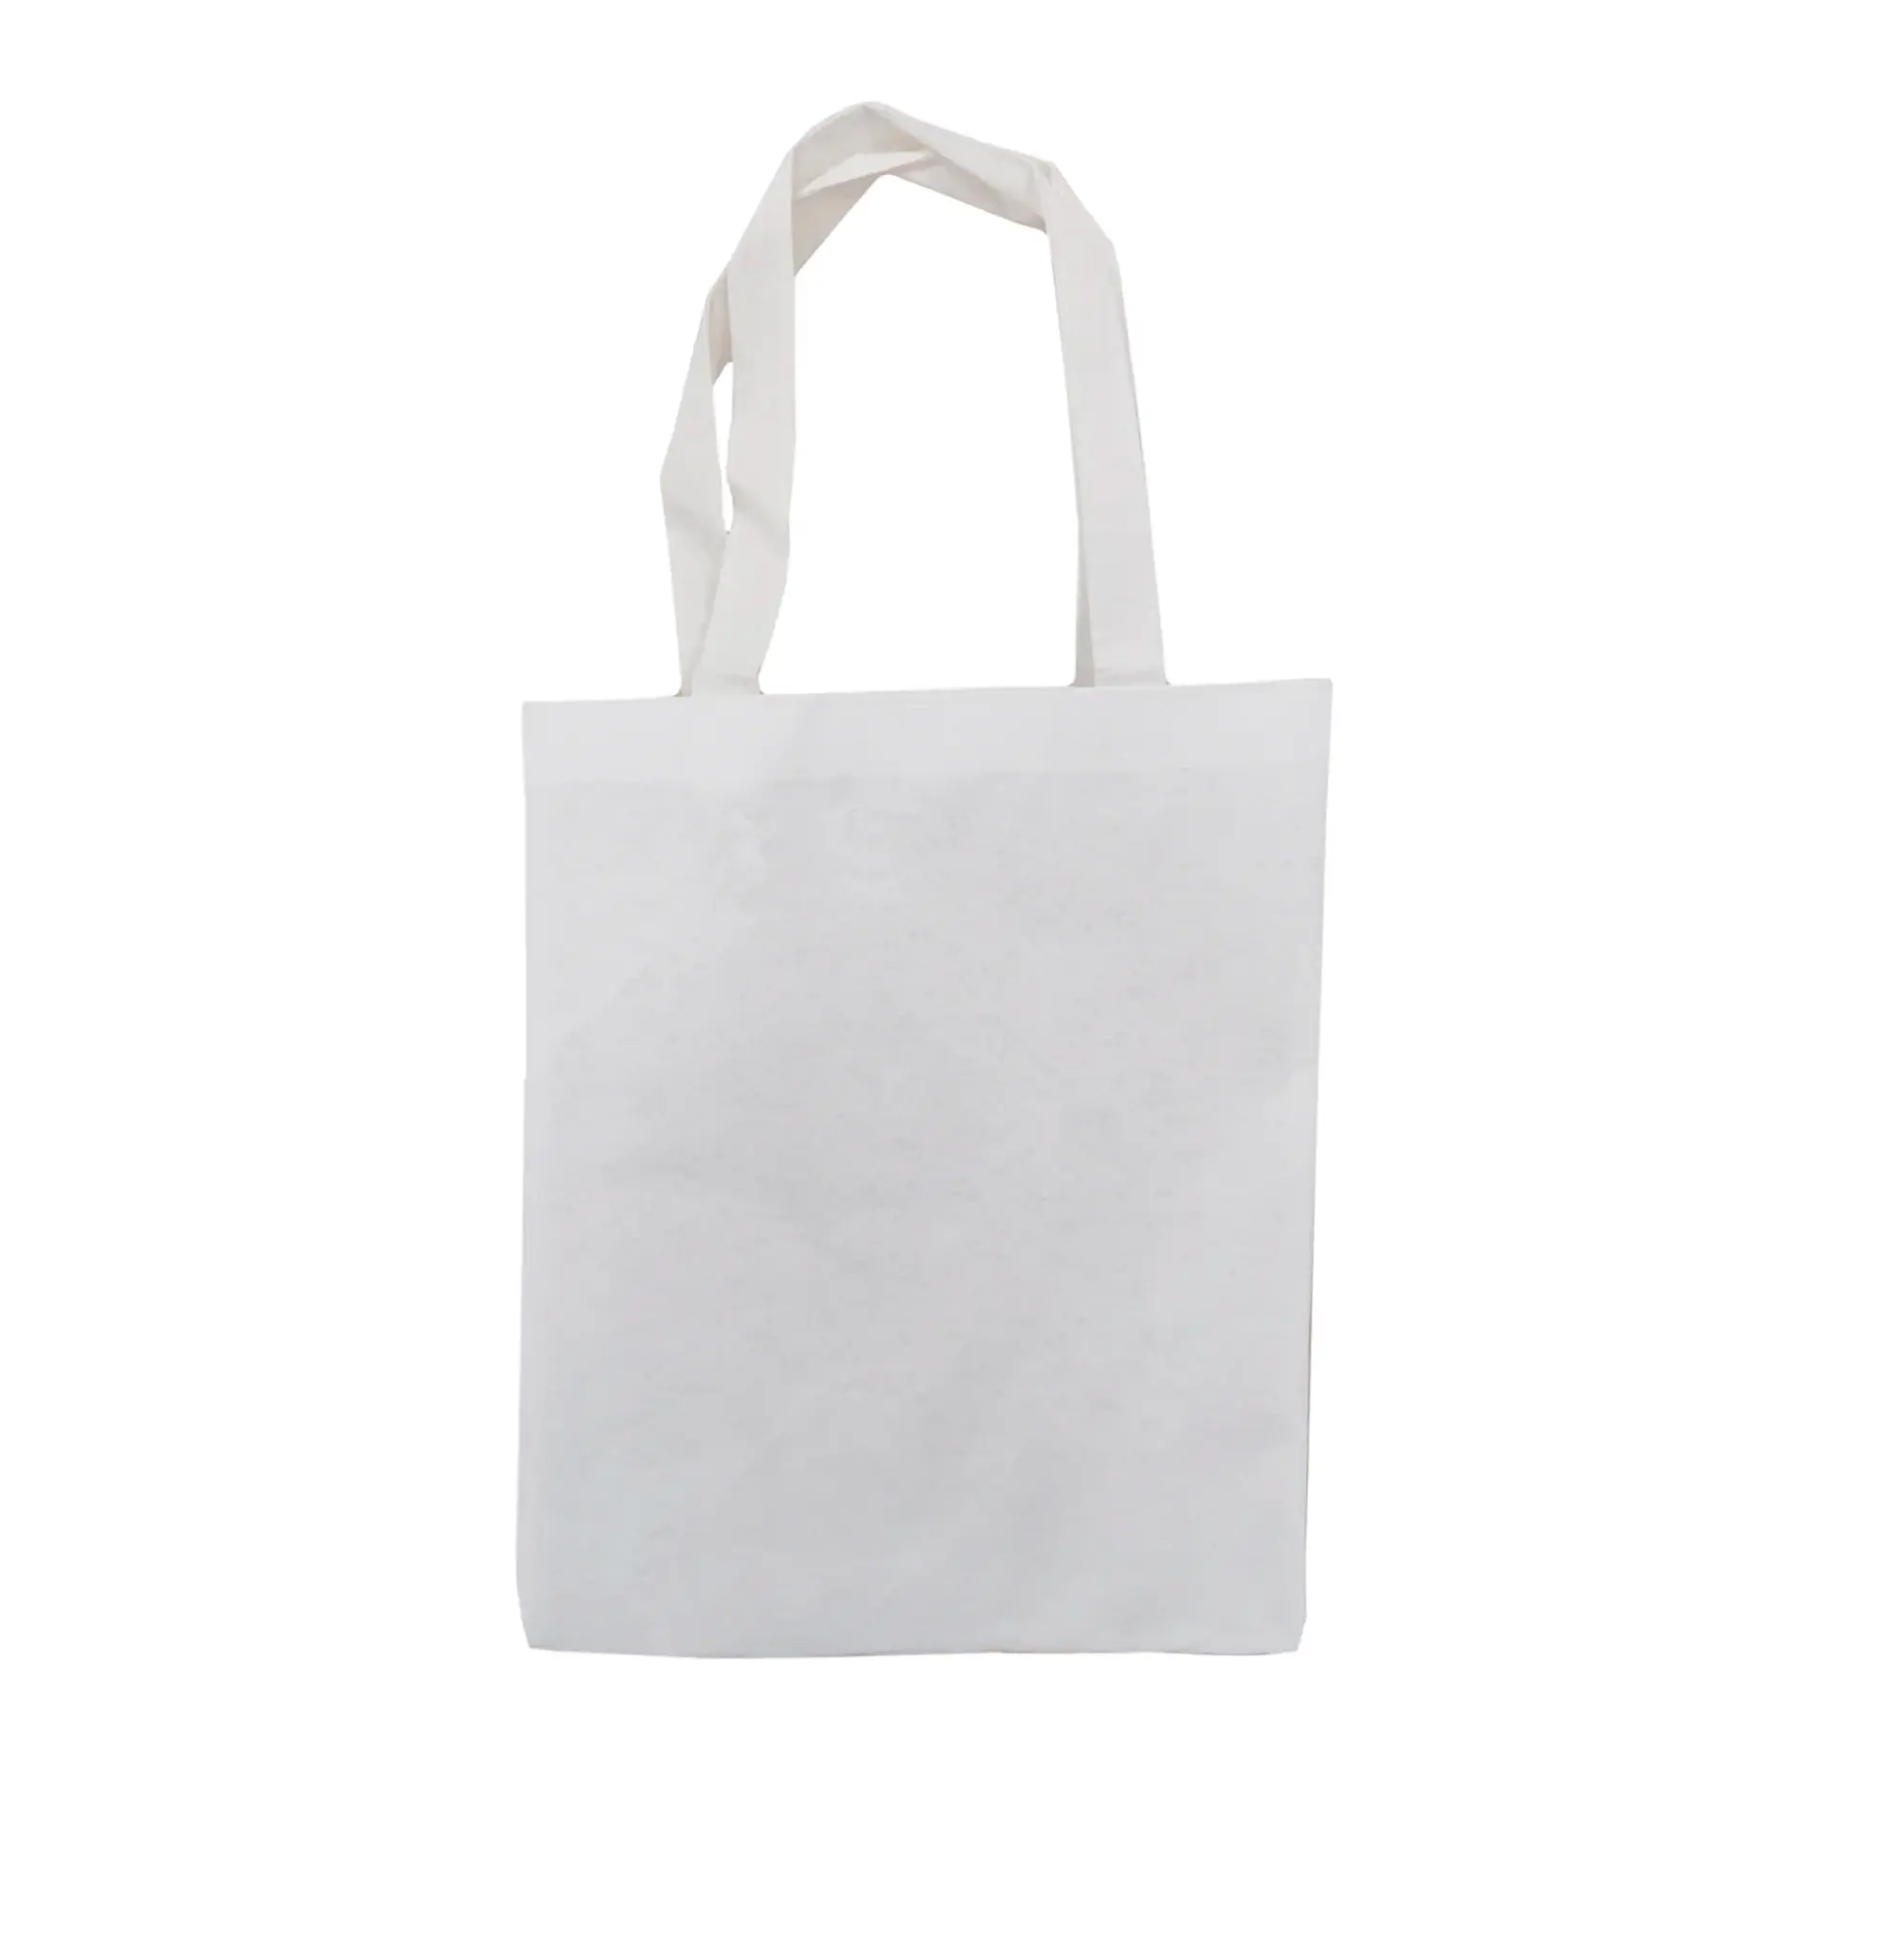 Tote Bags - Product Bags